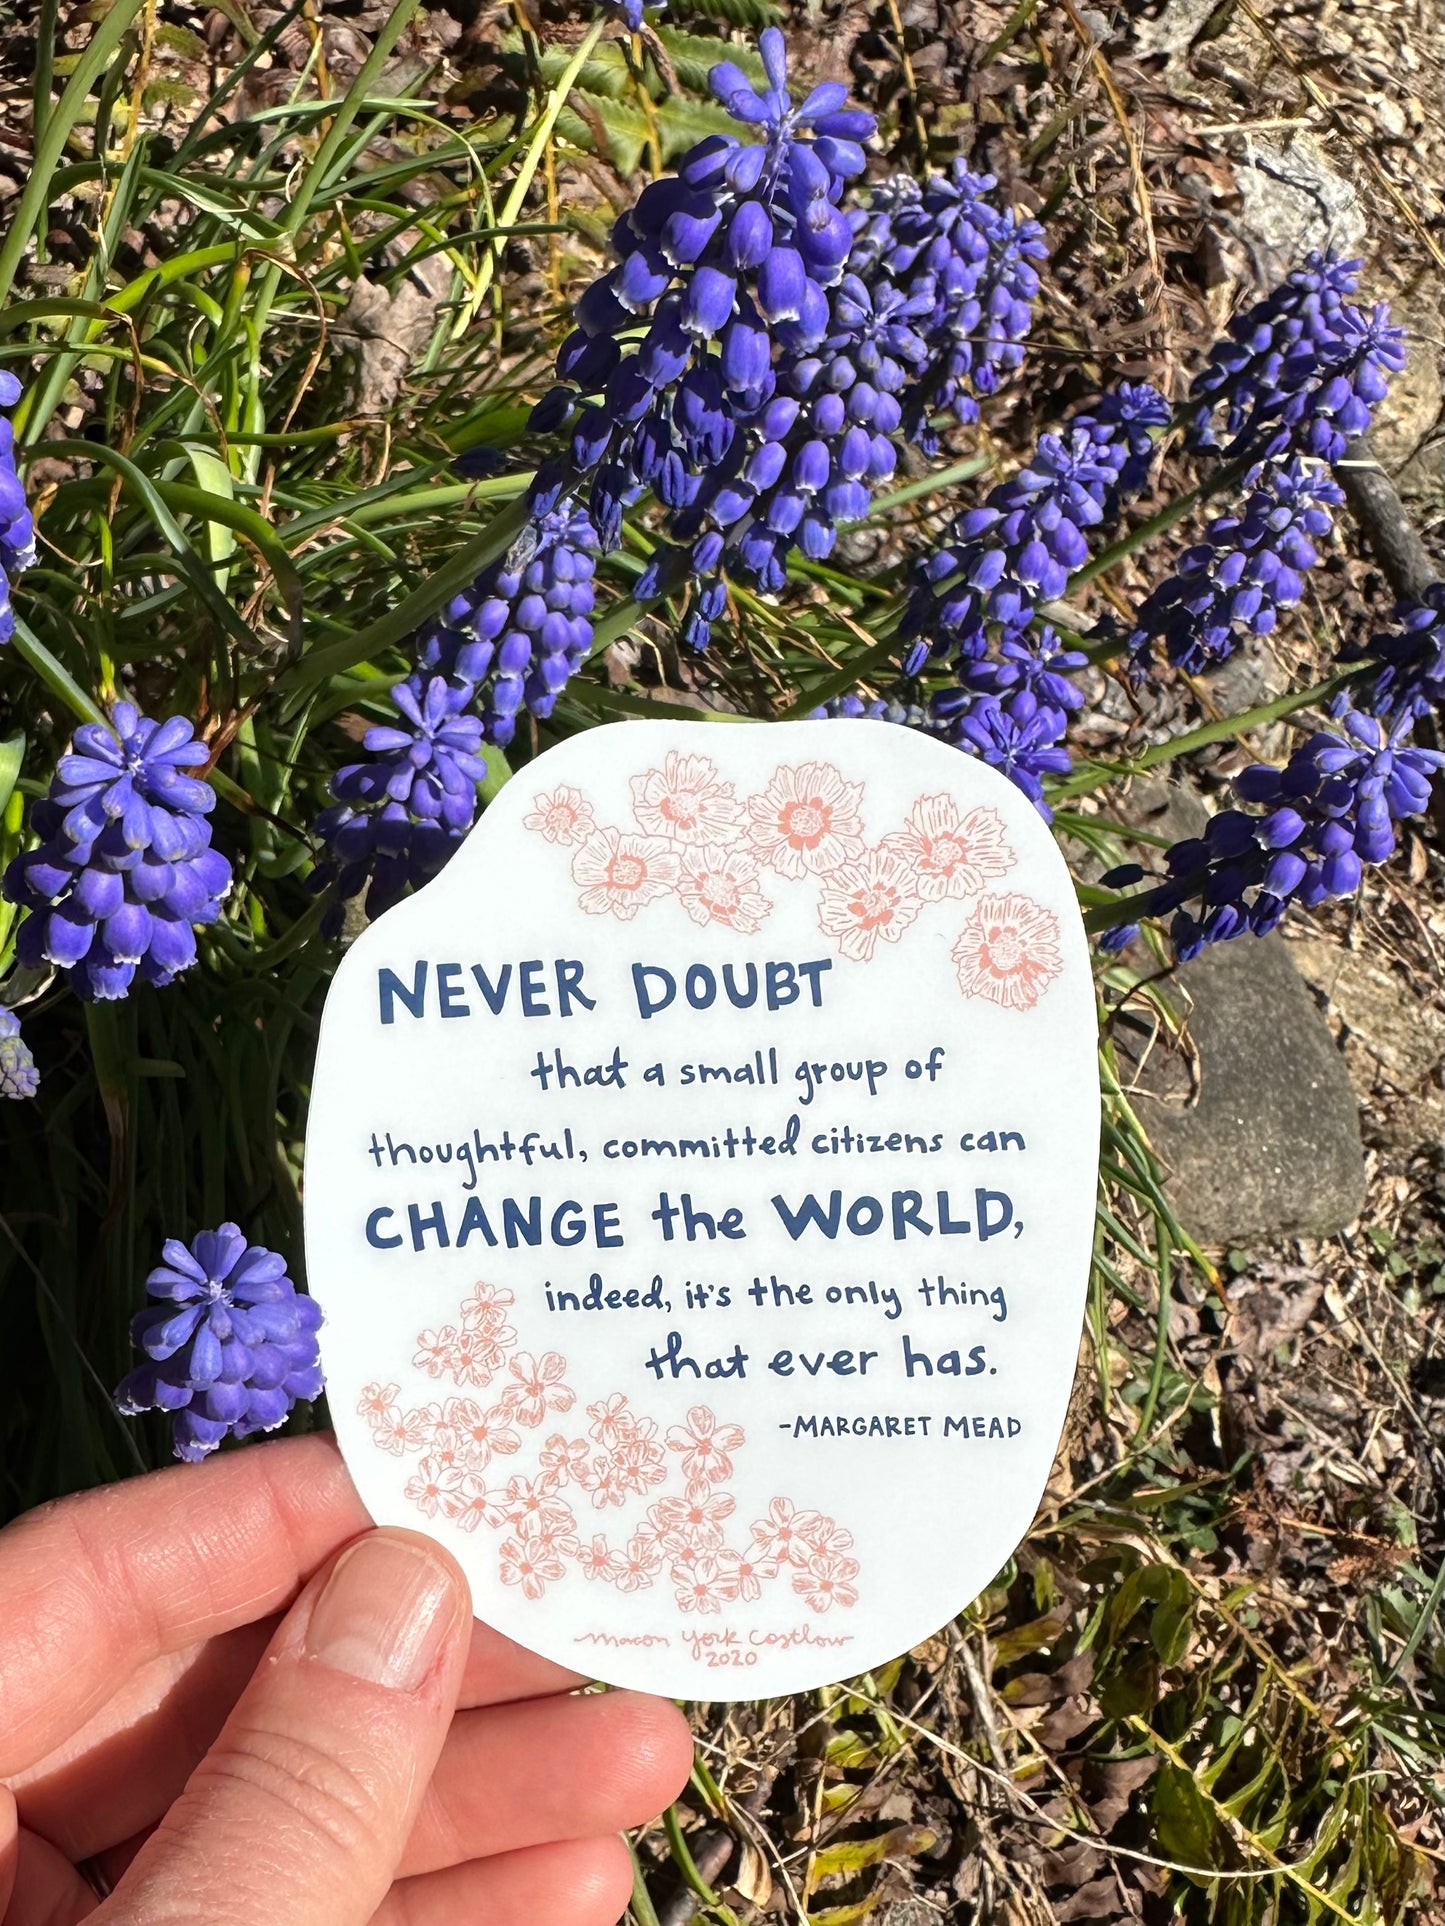 This vinyl sticker features original text by Margaret Mead, hand-drawn in a funky folk-art style of Macon York: "Never doubt that a small group of thoughtful, committed citizens can change the world, indeed, it's the only thing that ever has." Hand-drawn coreopsis and phlox in cheerful coral ink and hand-lettered text in navy.  Sticker is shown outside in front of blooming grape hyacinth. 